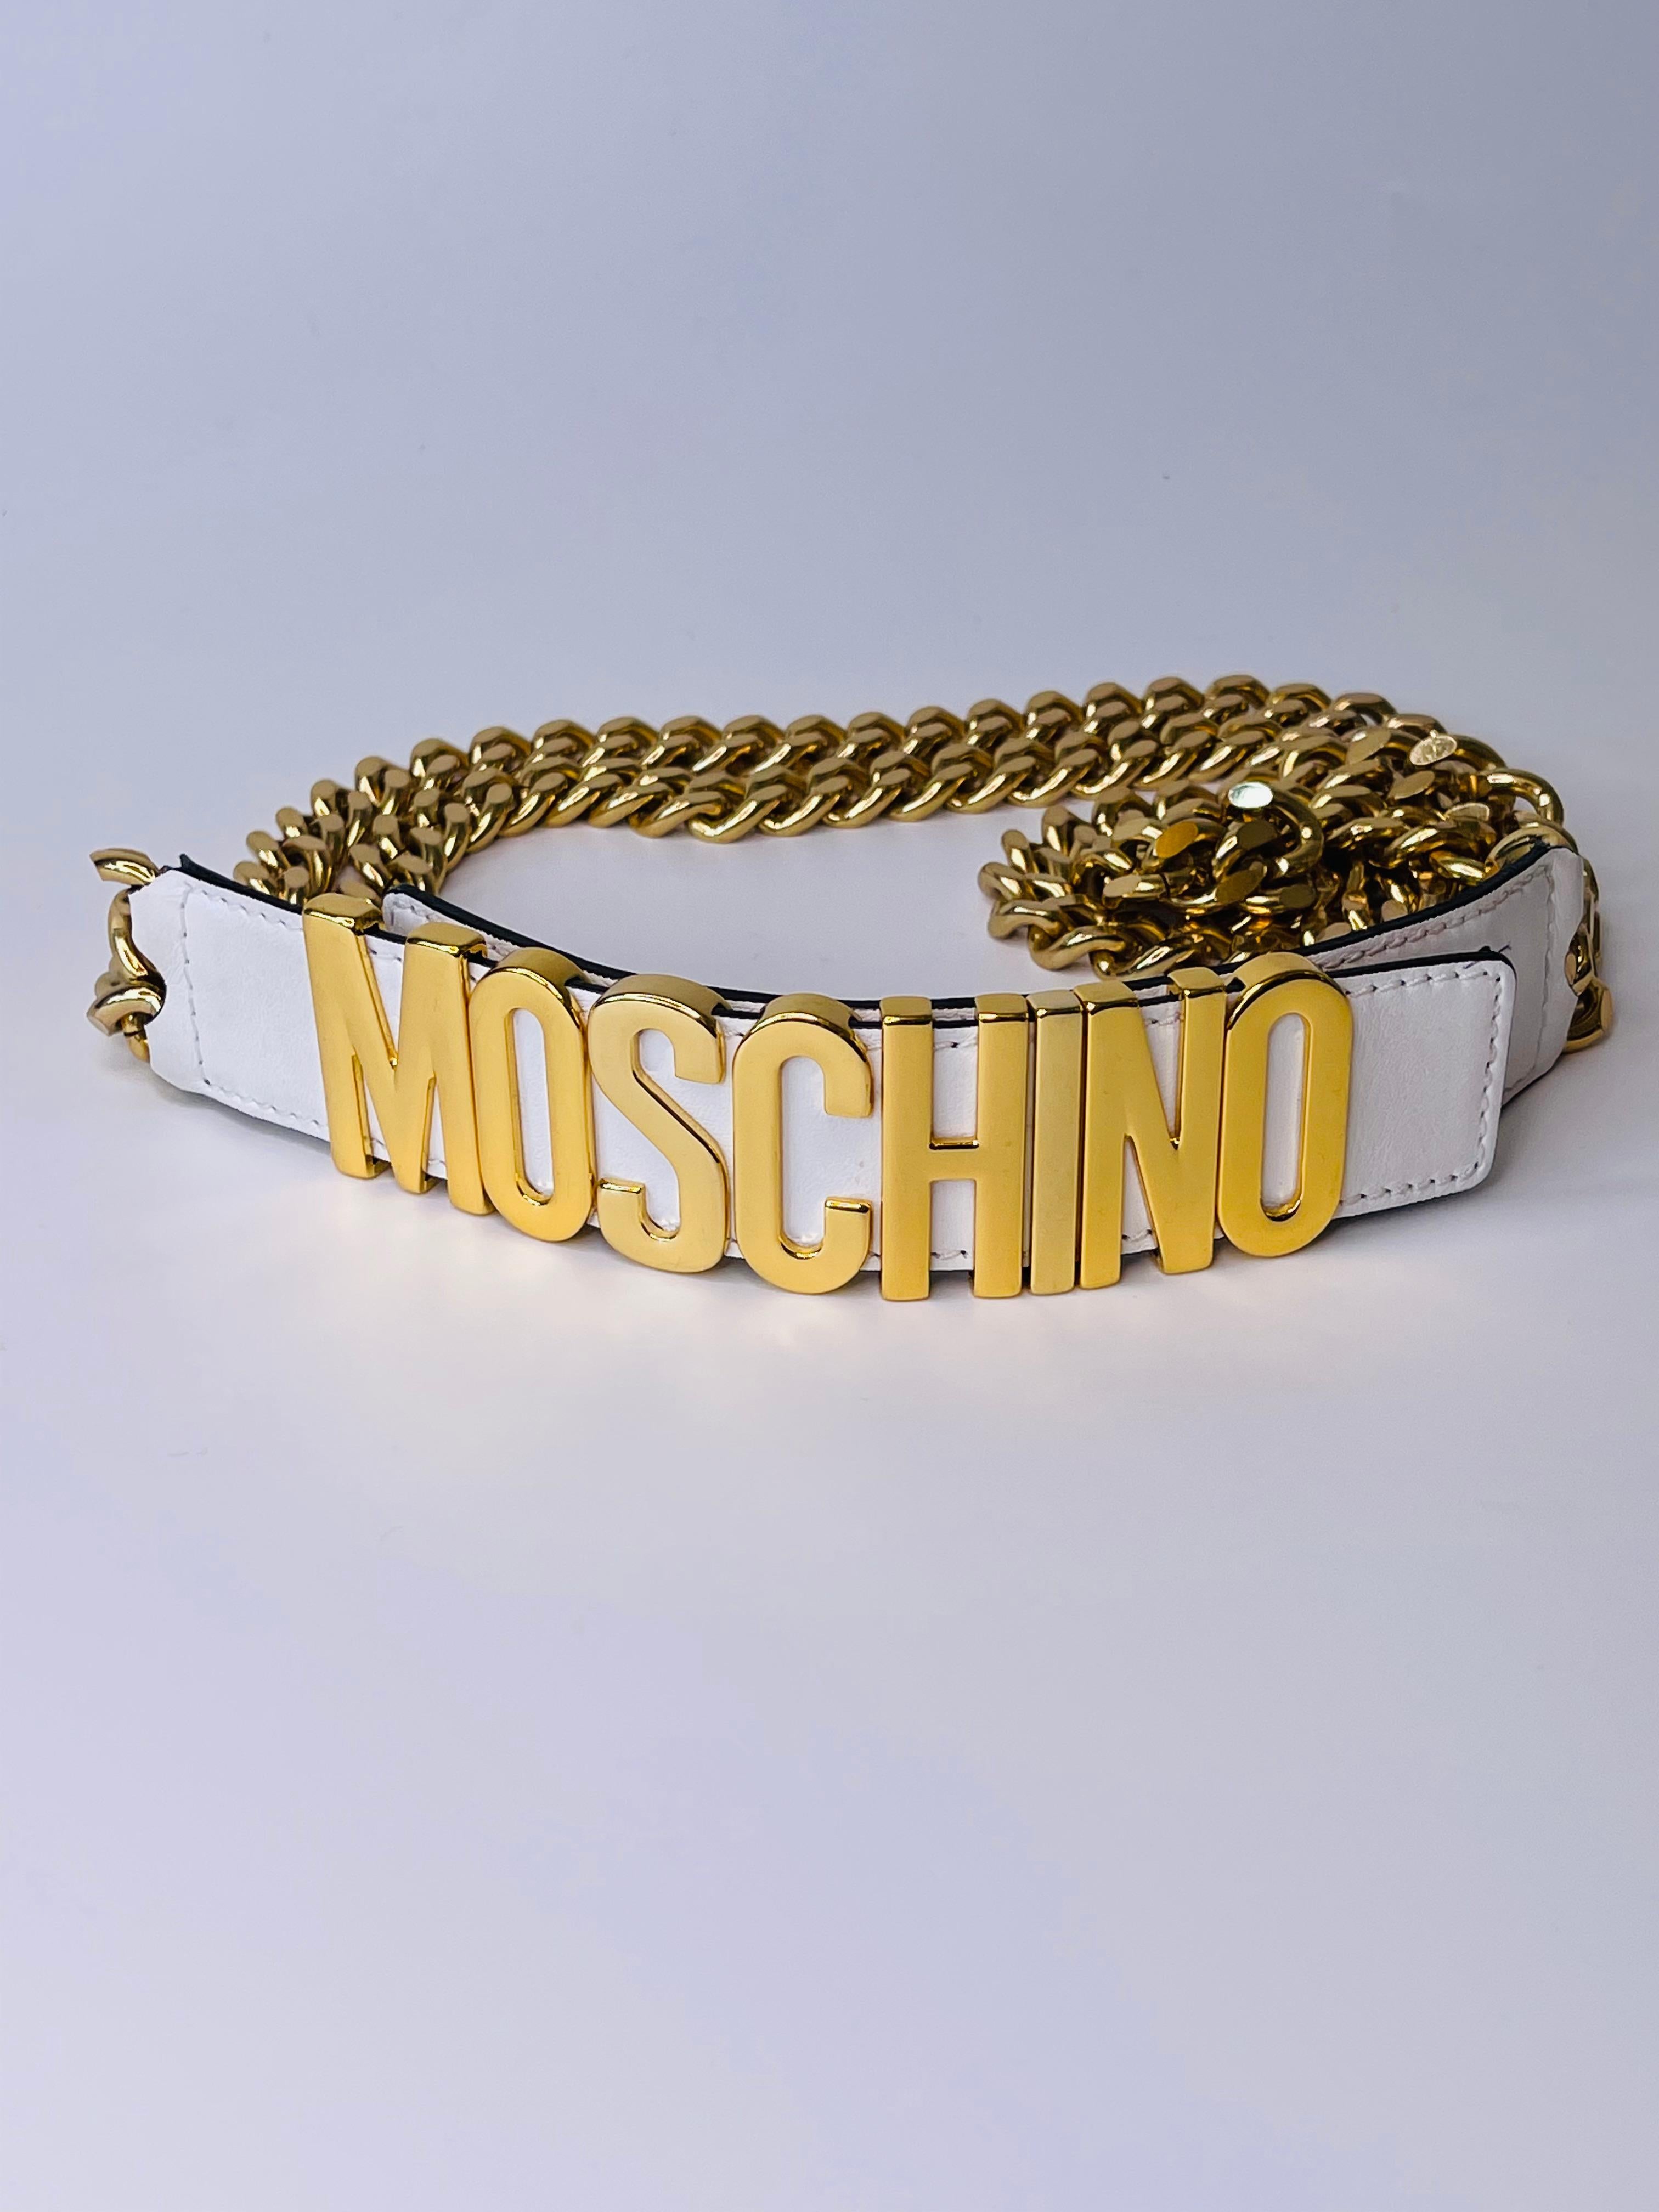 The dual chain links in gold-tone that connect the leather ends of the belt give this trendy accessory a classy touch. White leather strap bears the brand name in gleaming gold hue to provide the piece with a signature finish. From the 30th